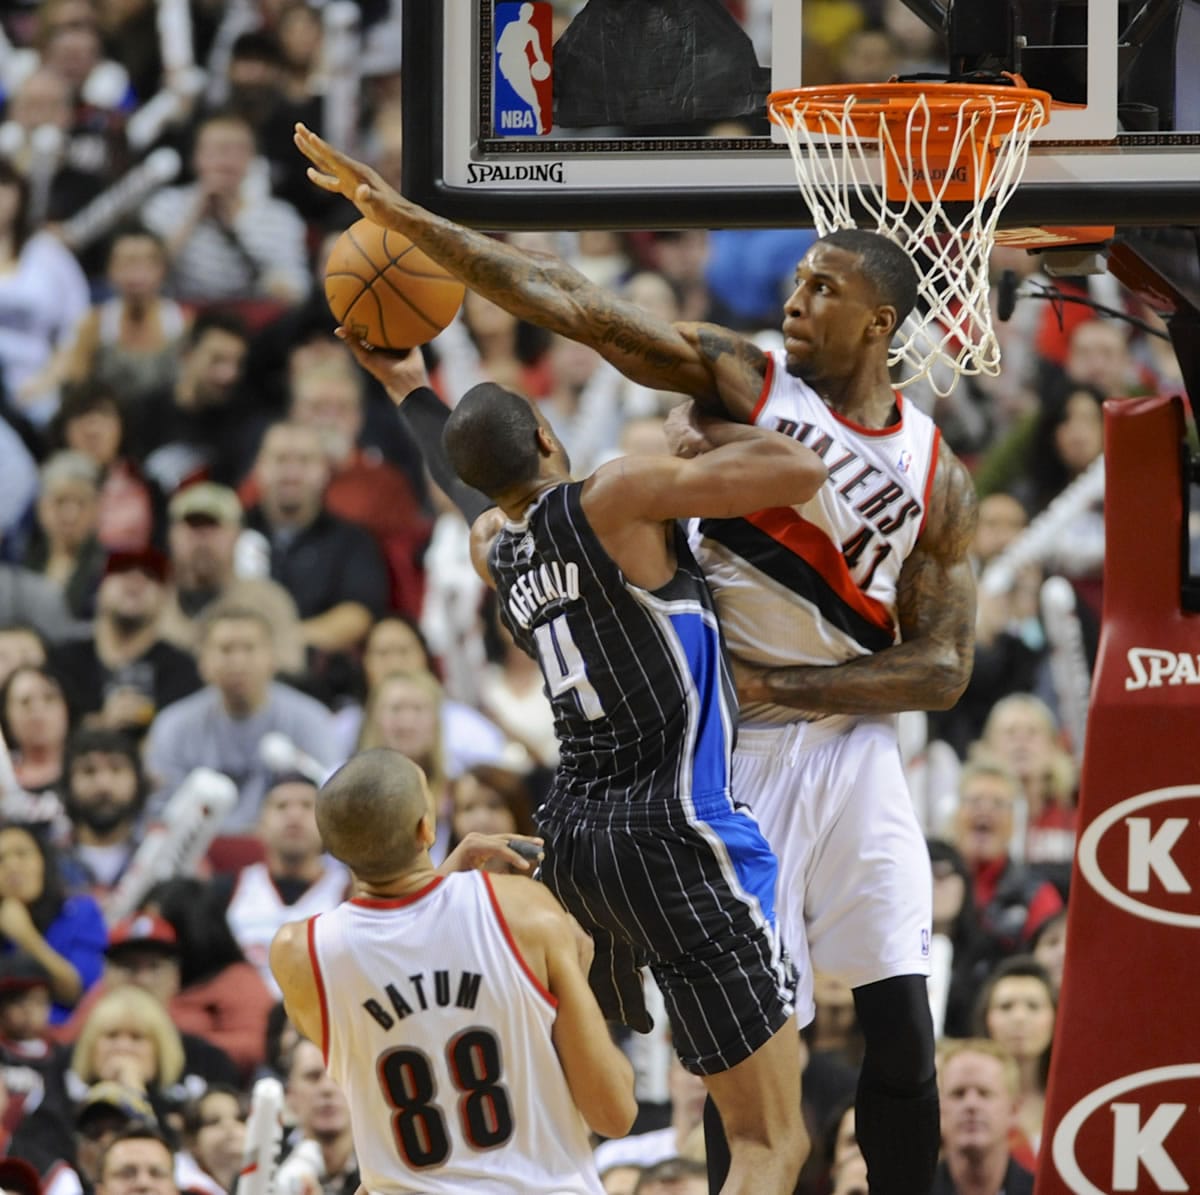 The Portland Trail Blazers' Thomas Robinson (41) defends a shot by the Orlando Magic's Arron Afflalo (4) during the second half of Wednesday's game. The Trail Blazers beat the Magic 110-94.